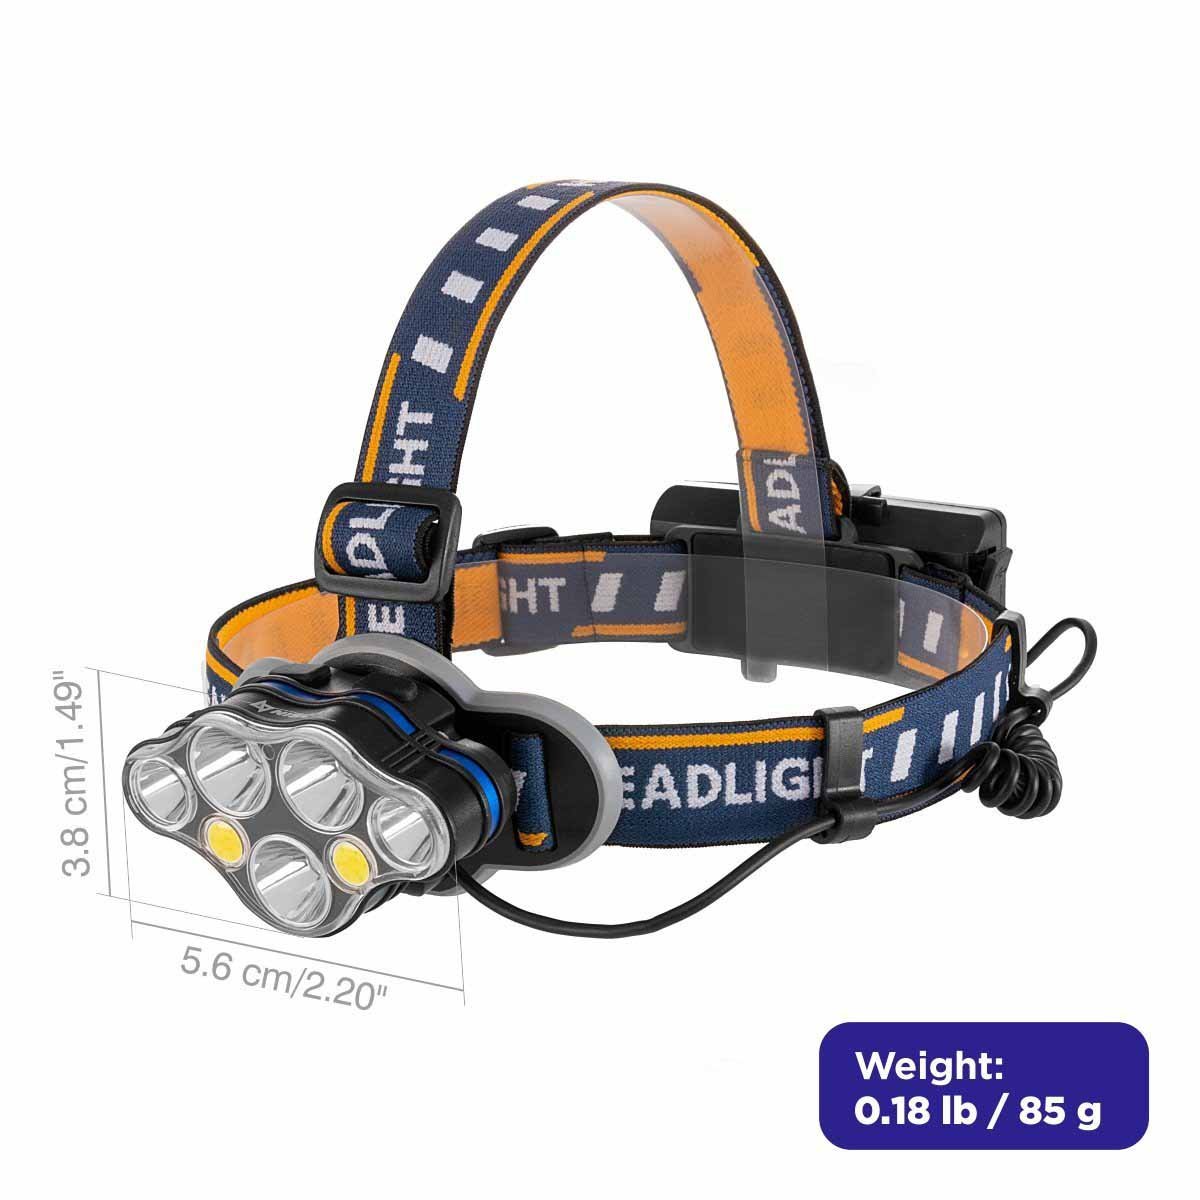 LED Rechargeable Water-resistant Headlamp, Red and White Light weighs only 0.2 lbs